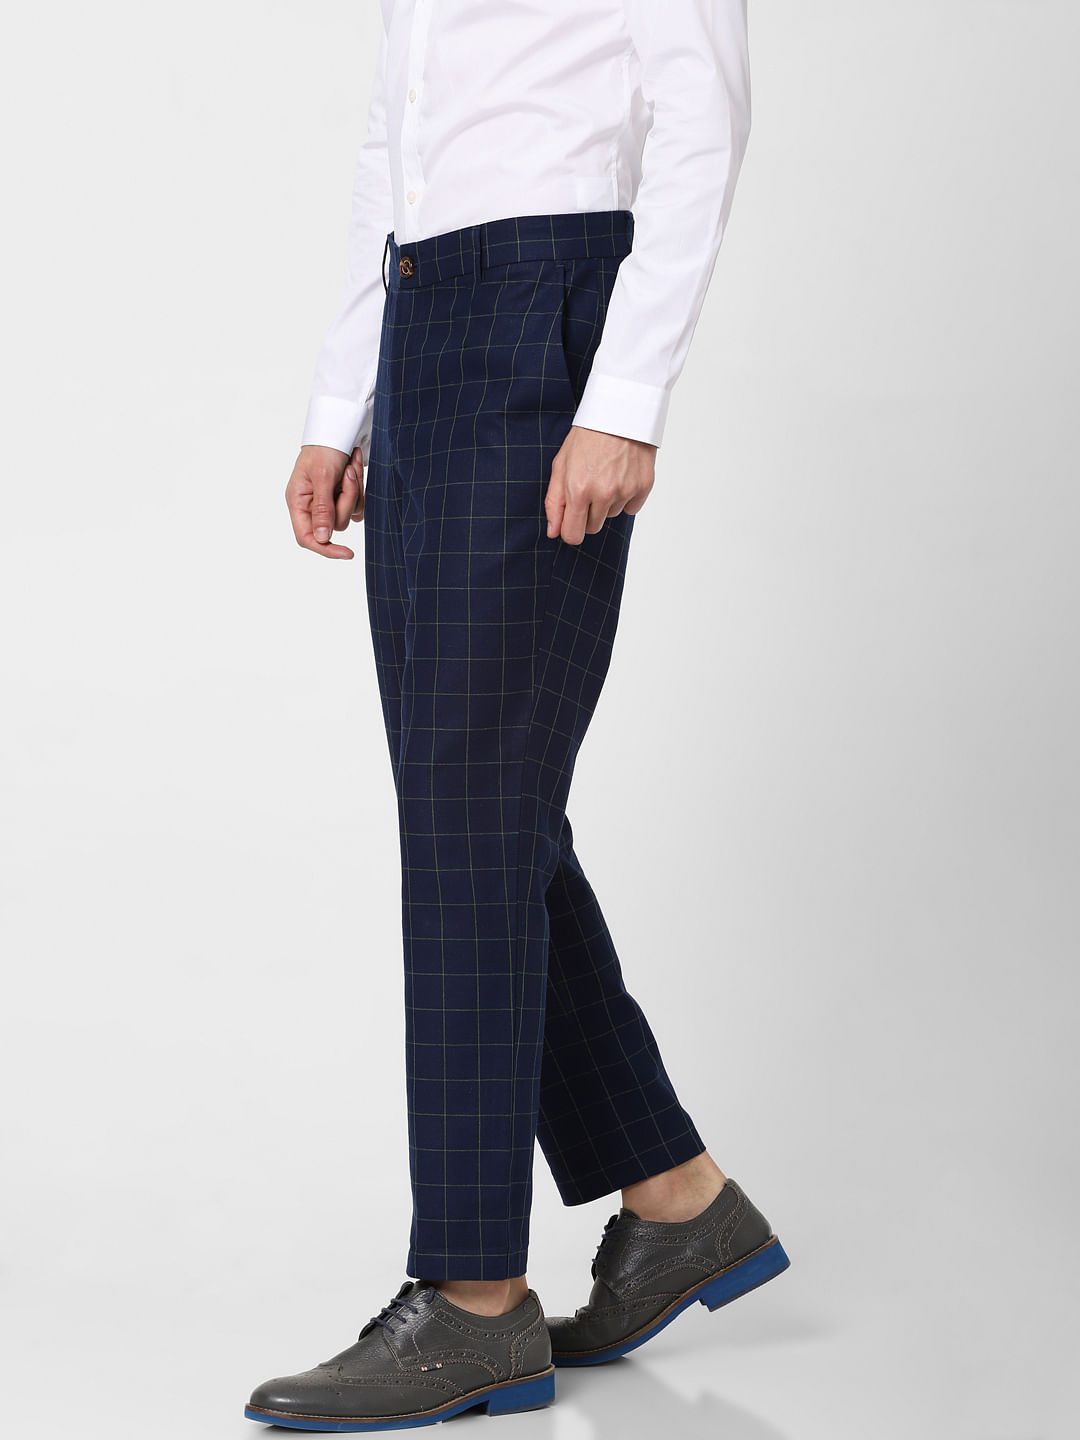 Low Rise Slim Fit Trousers  Buy Low Rise Slim Fit Trousers online in India